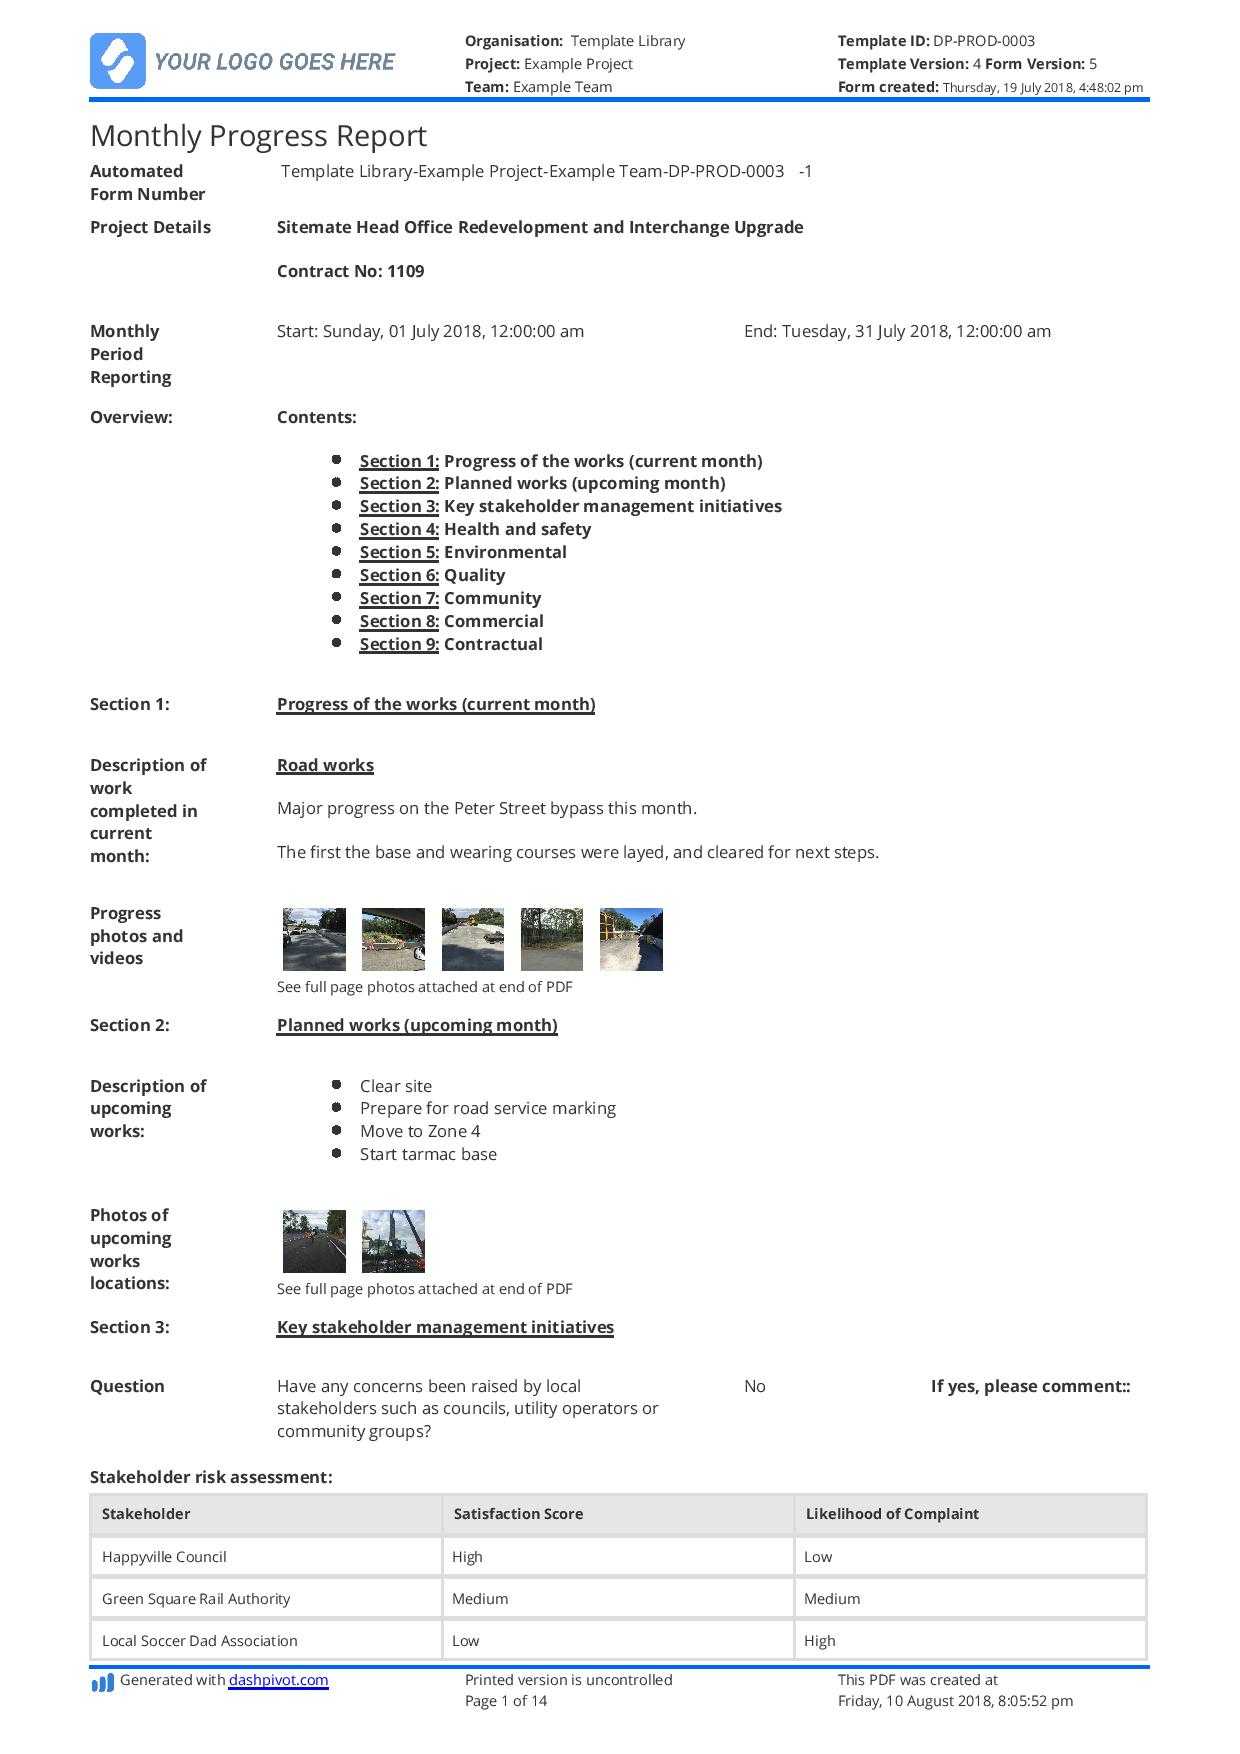 Monthly Construction Progress Report Template: Use This Inside Site Progress Report Template